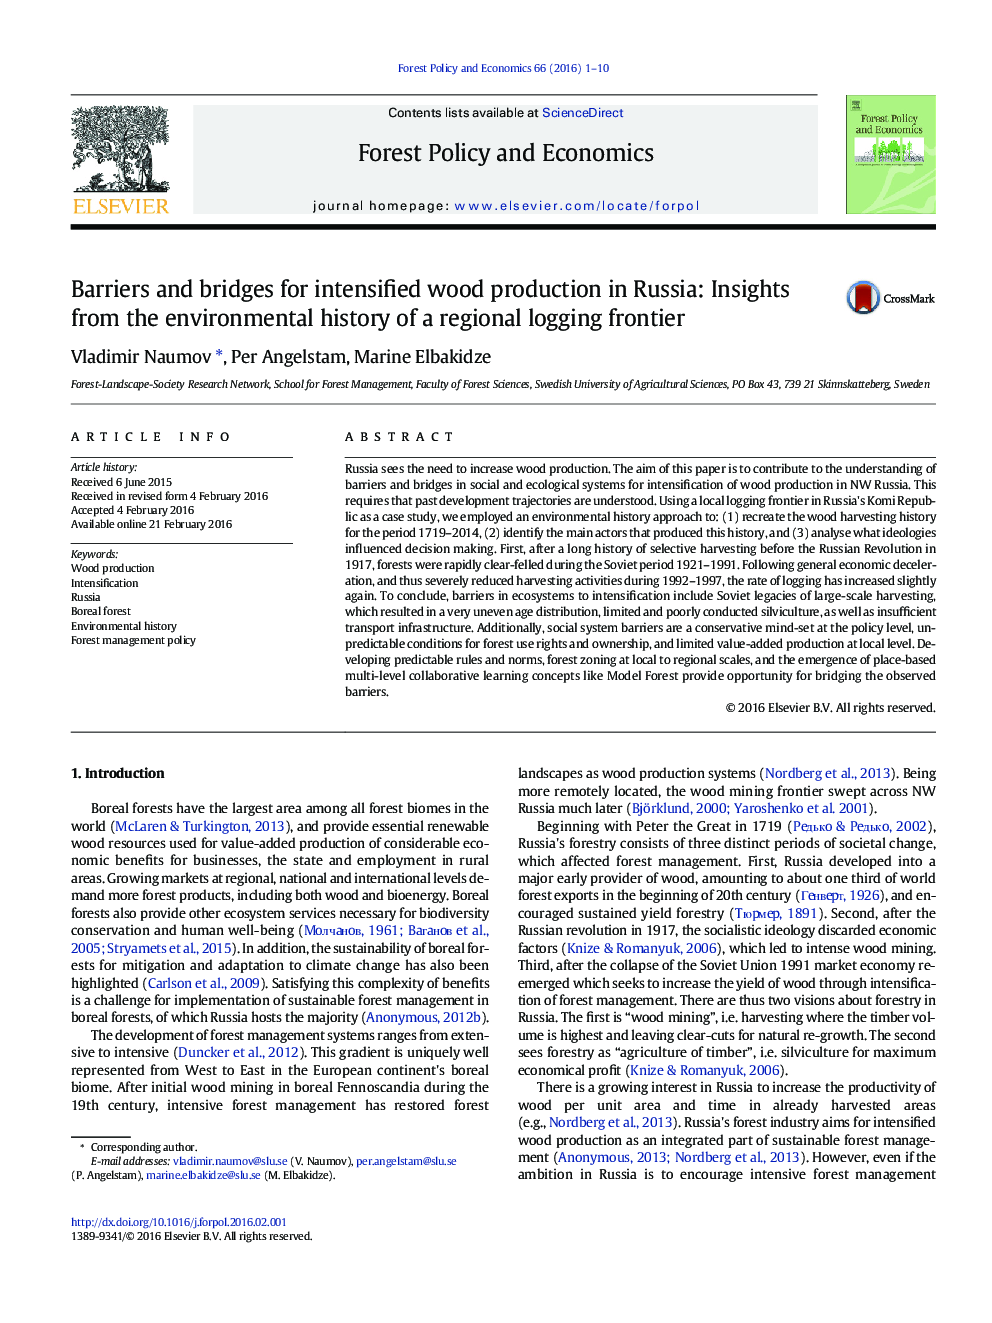 Barriers and bridges for intensified wood production in Russia: Insights from the environmental history of a regional logging frontier